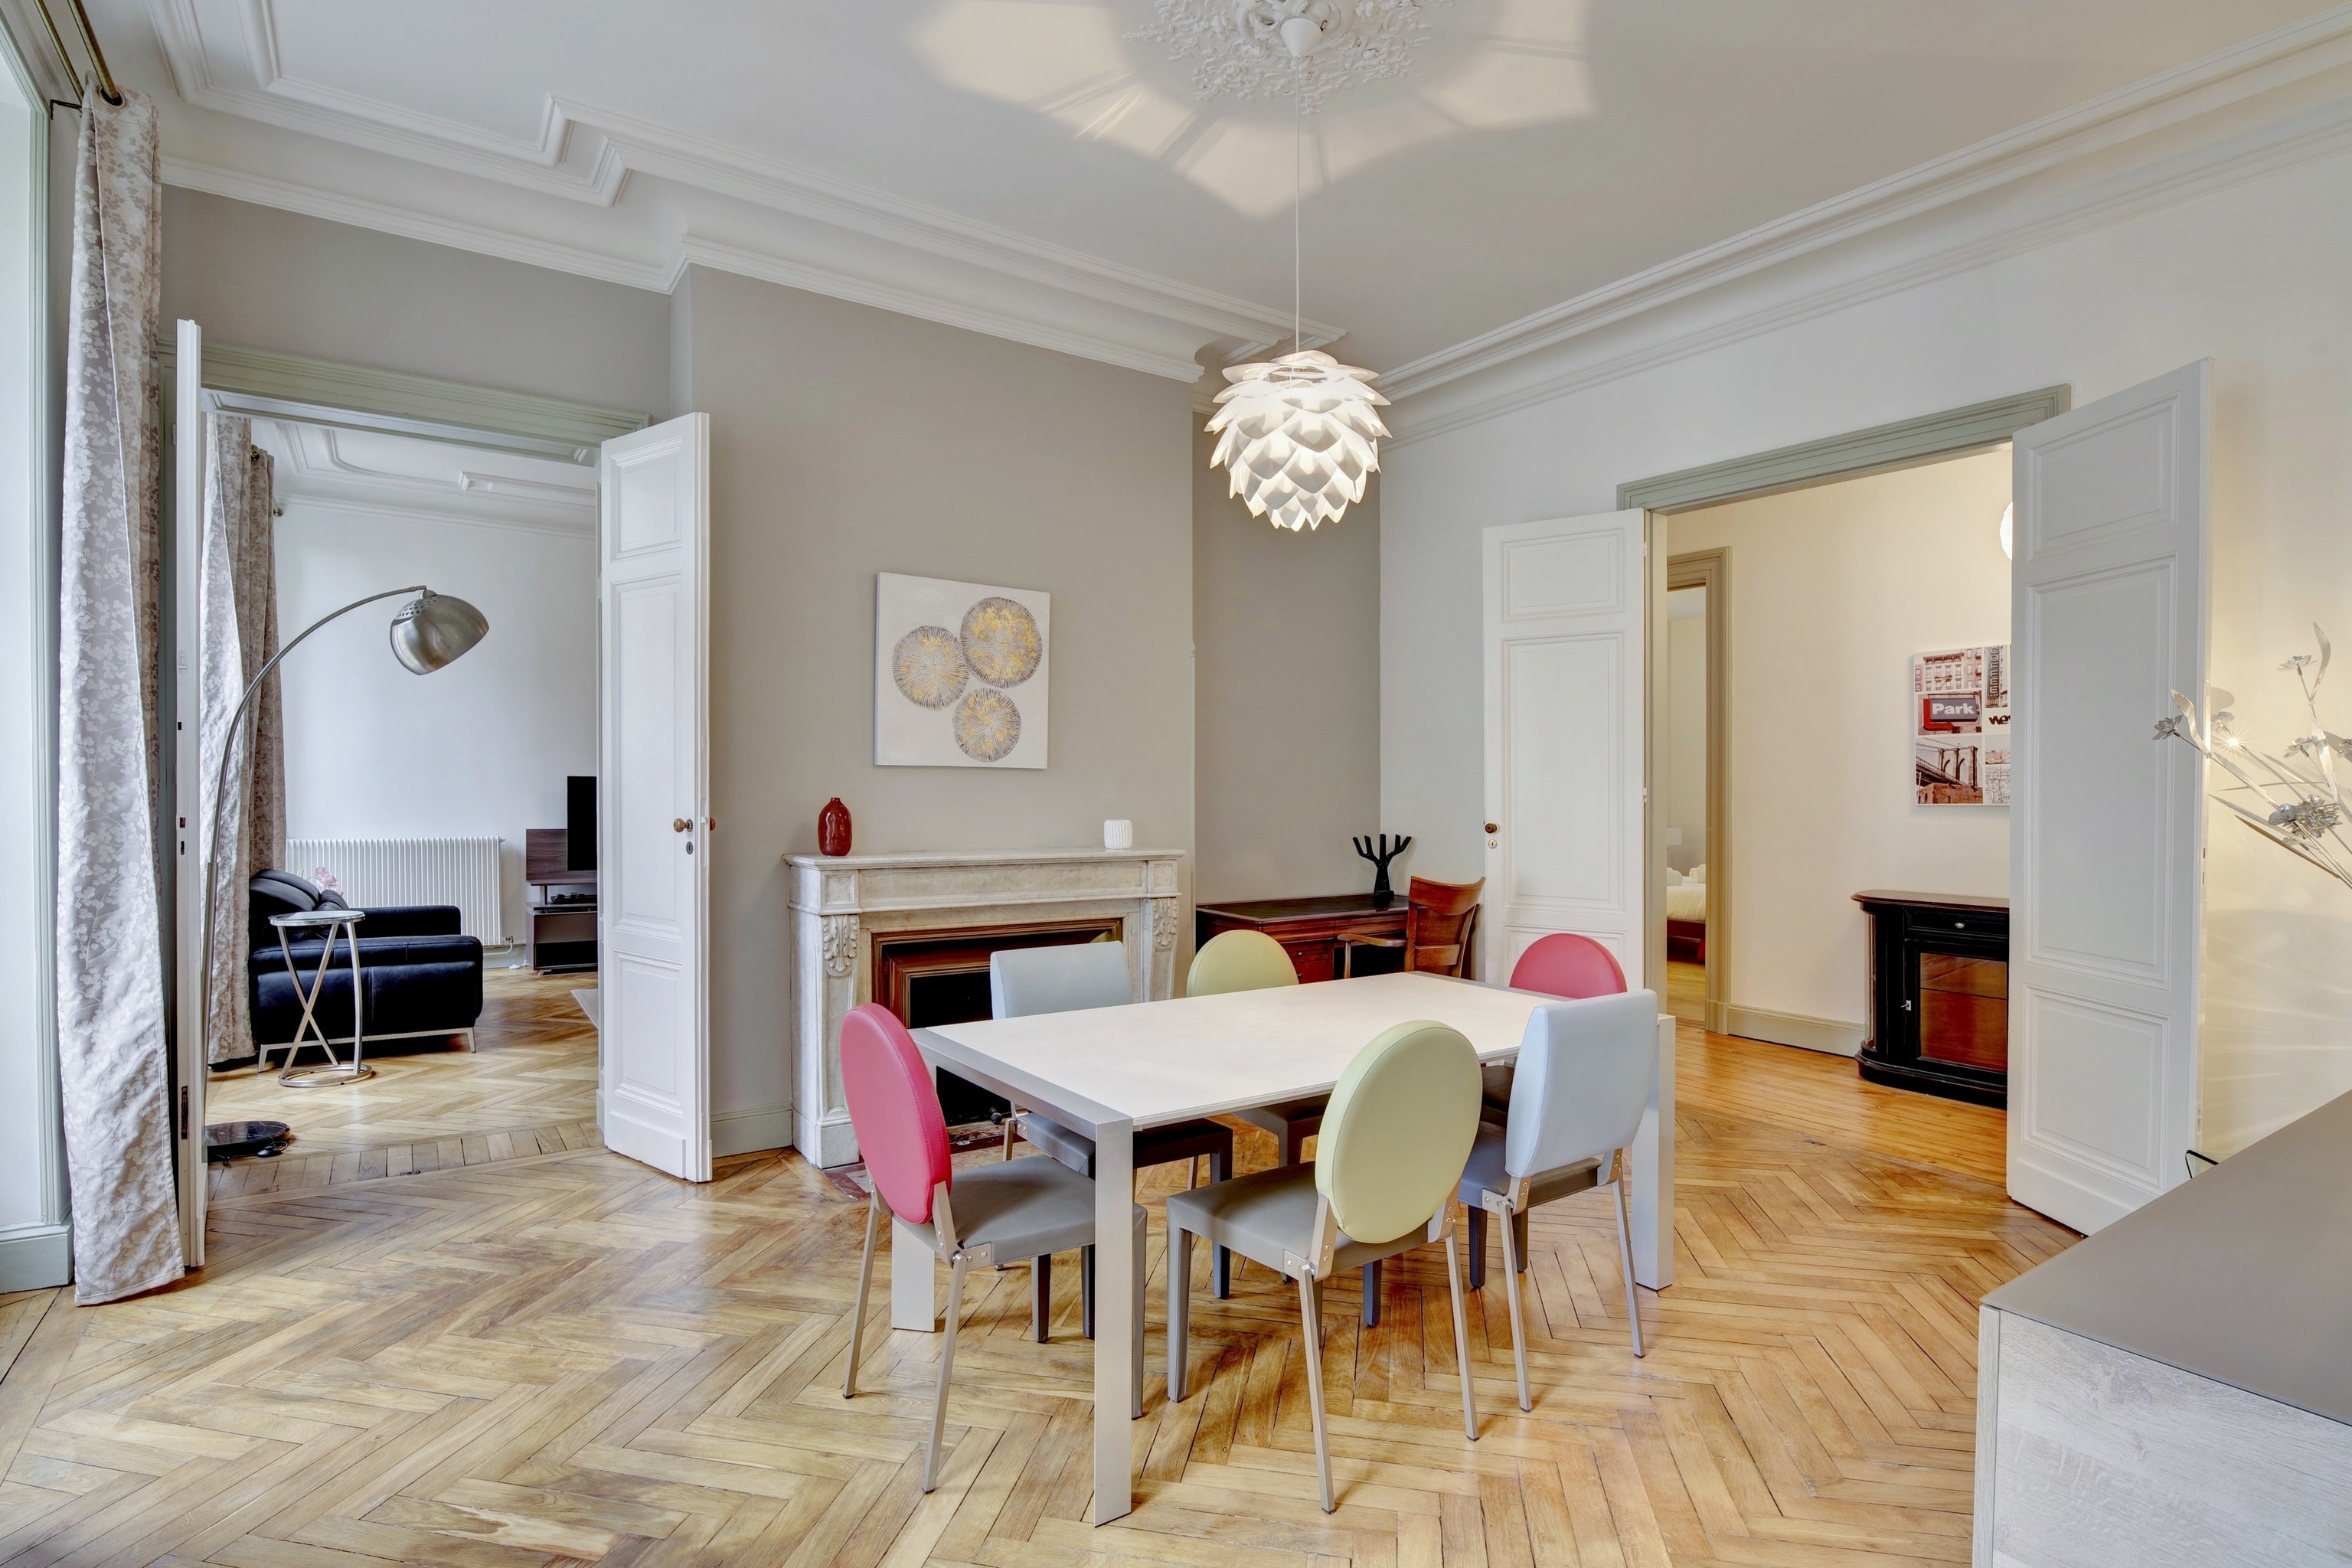 Property Image 1 - Sophisticated four bedroom flat in Bordeaux’s golden triangle